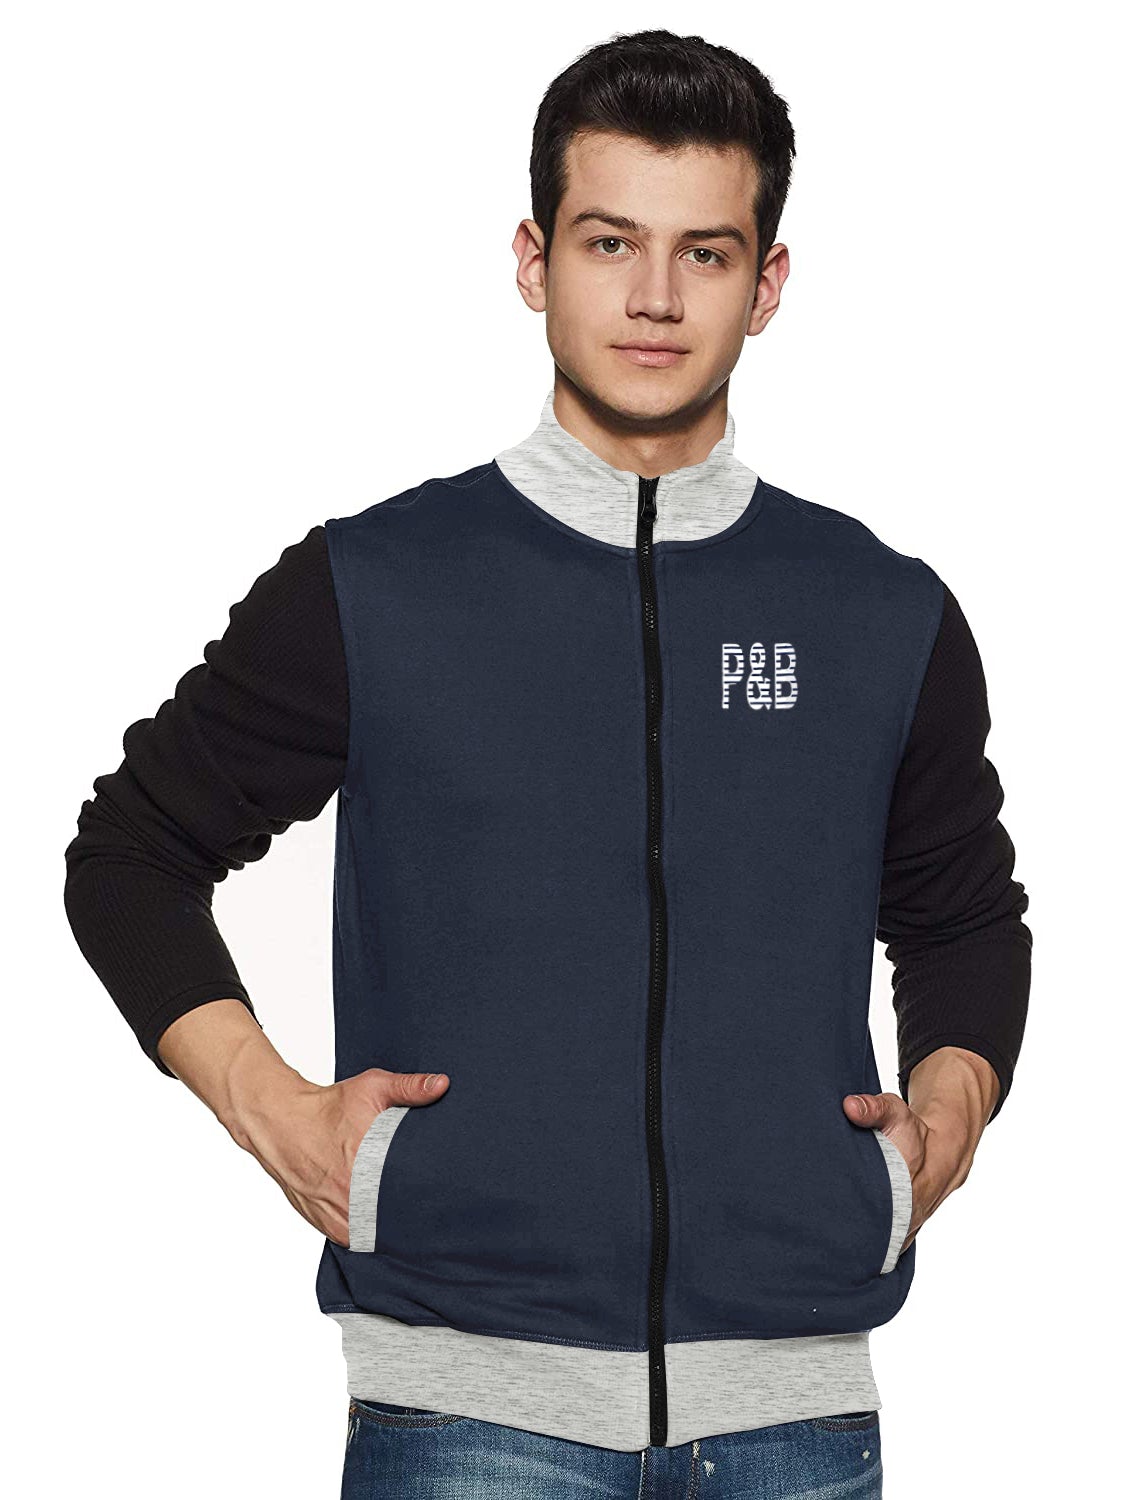 20 Wholesale Men's Full Zip Mock Neck Micro Fleece Jacket With Patch  Pockets Solid Black - at 